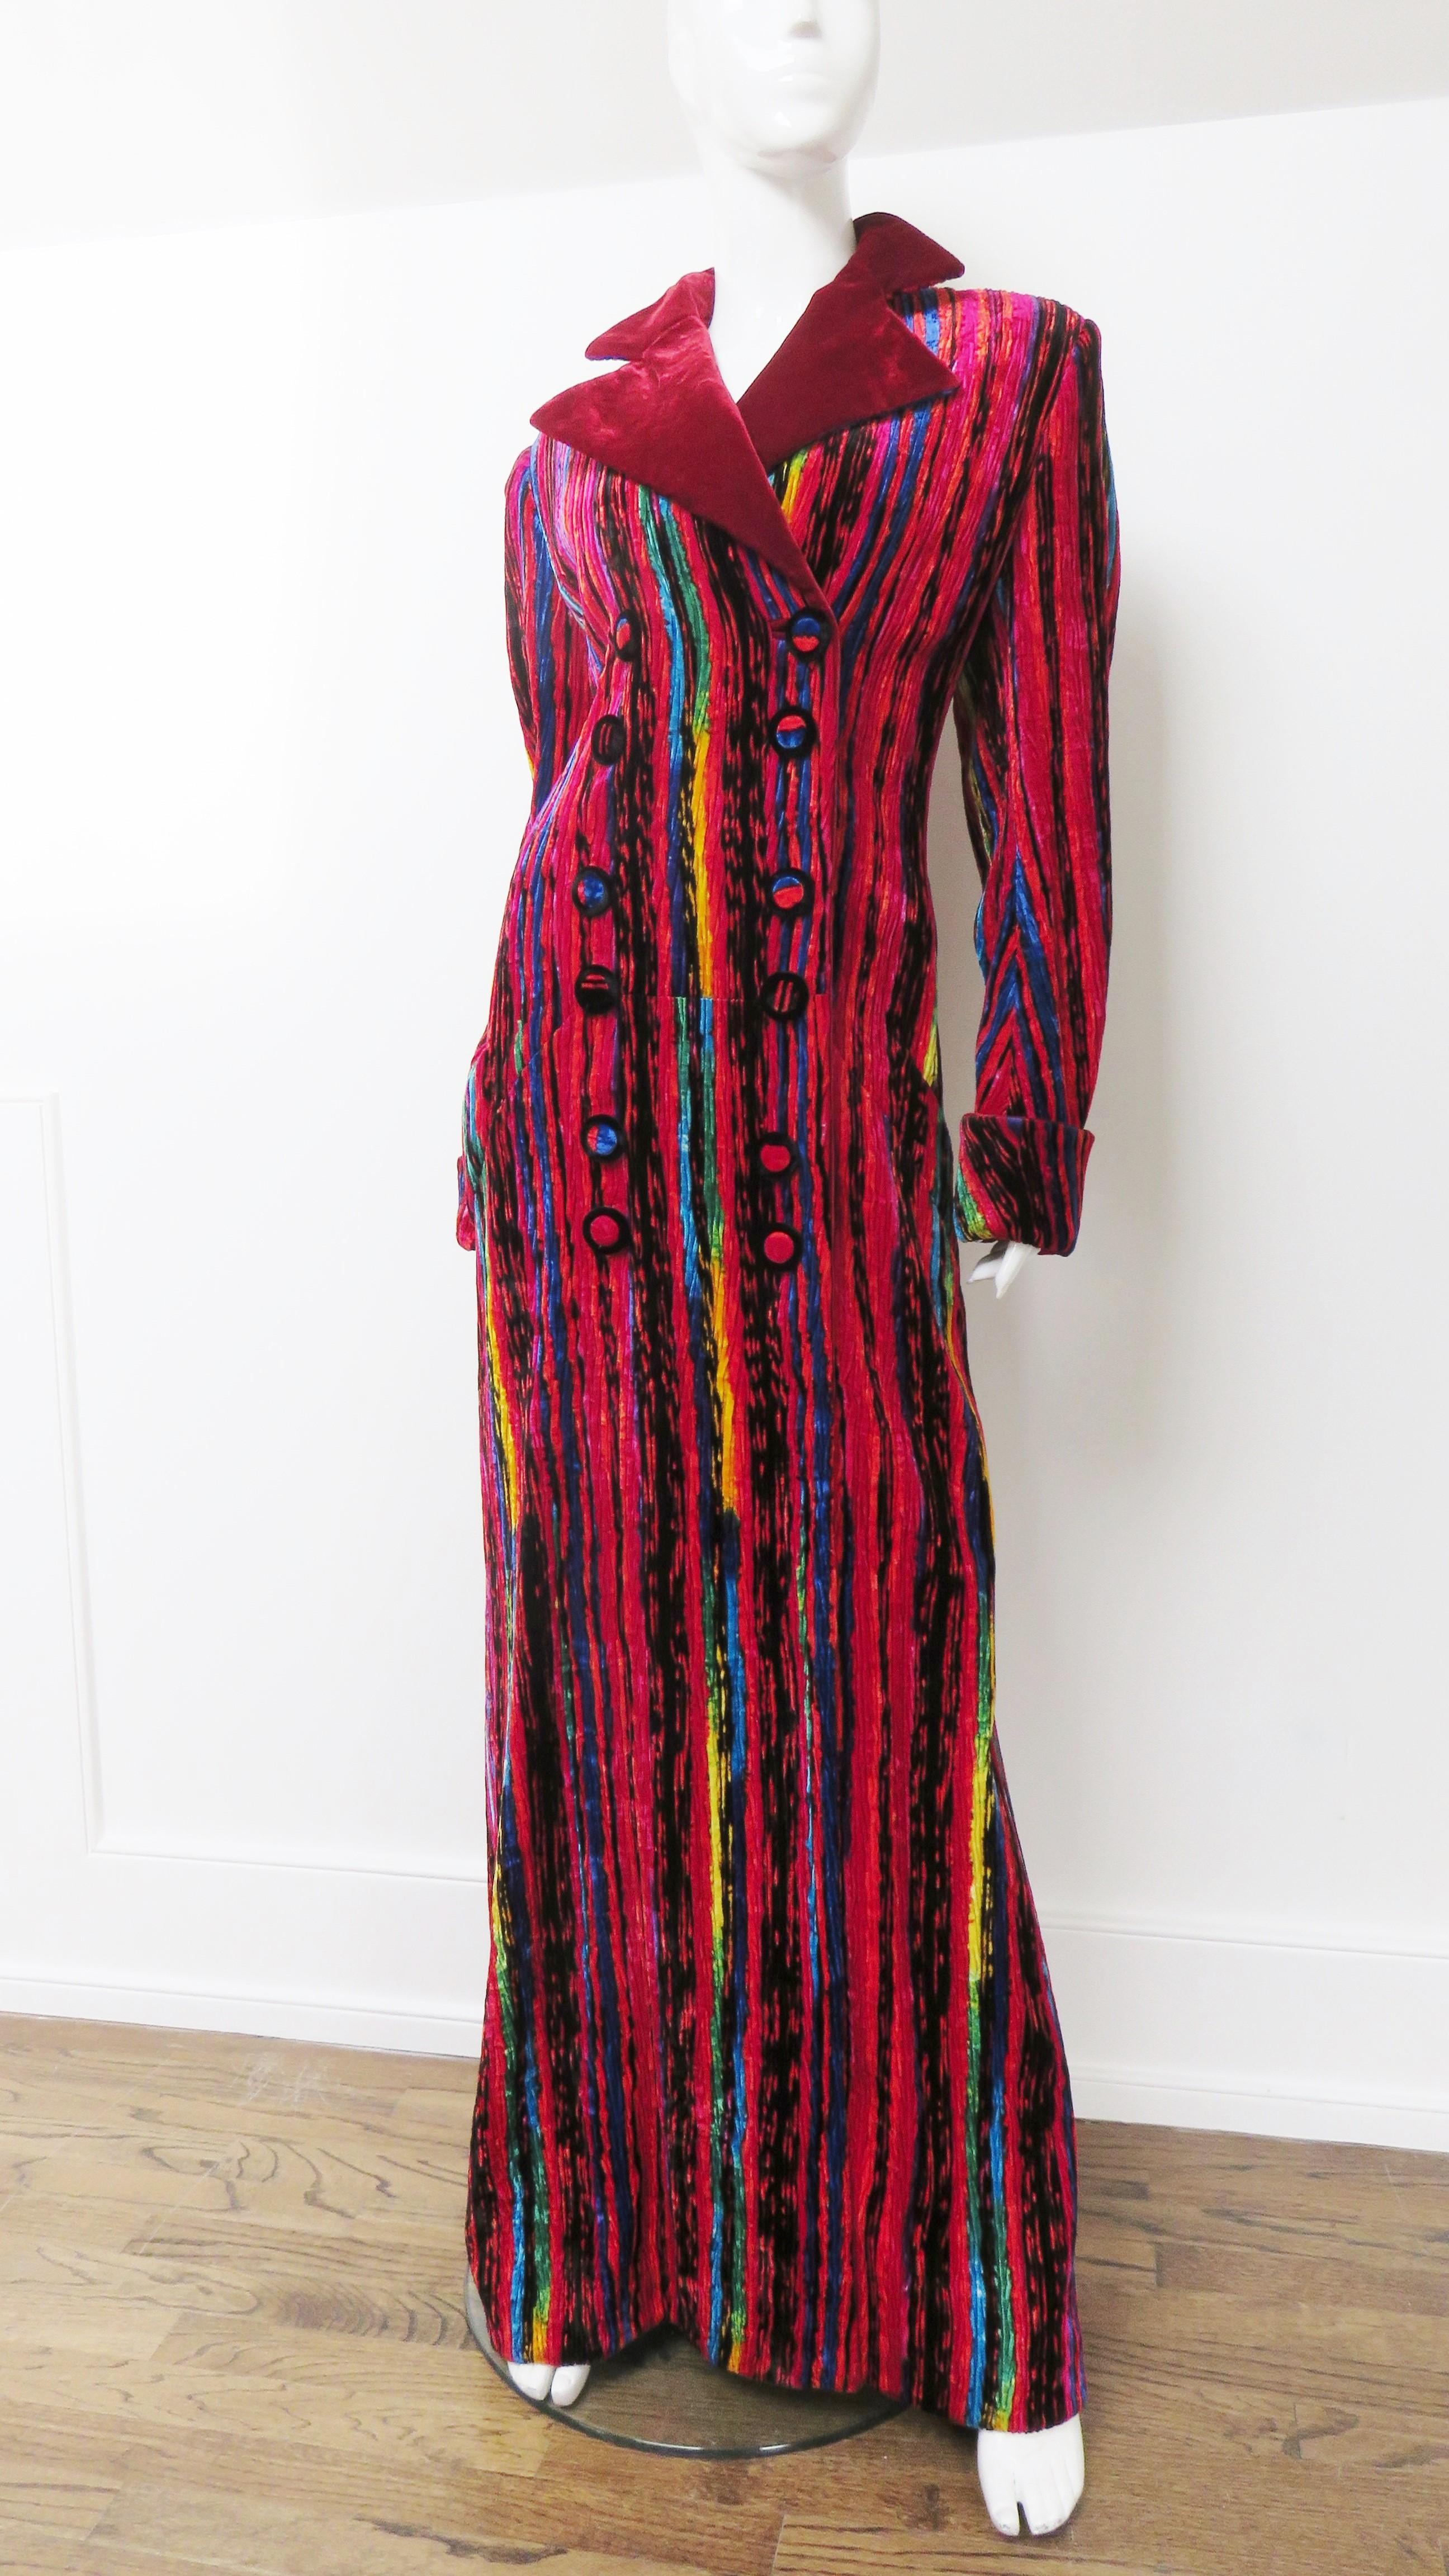 A fabulous full length silk velvet maxi jacket from Atelier Versace from Gianni Versace in red with brightly colored variegated vertical stripes in yellow, blue, green and black. The coat is double breasted with self covered front buttons and one on